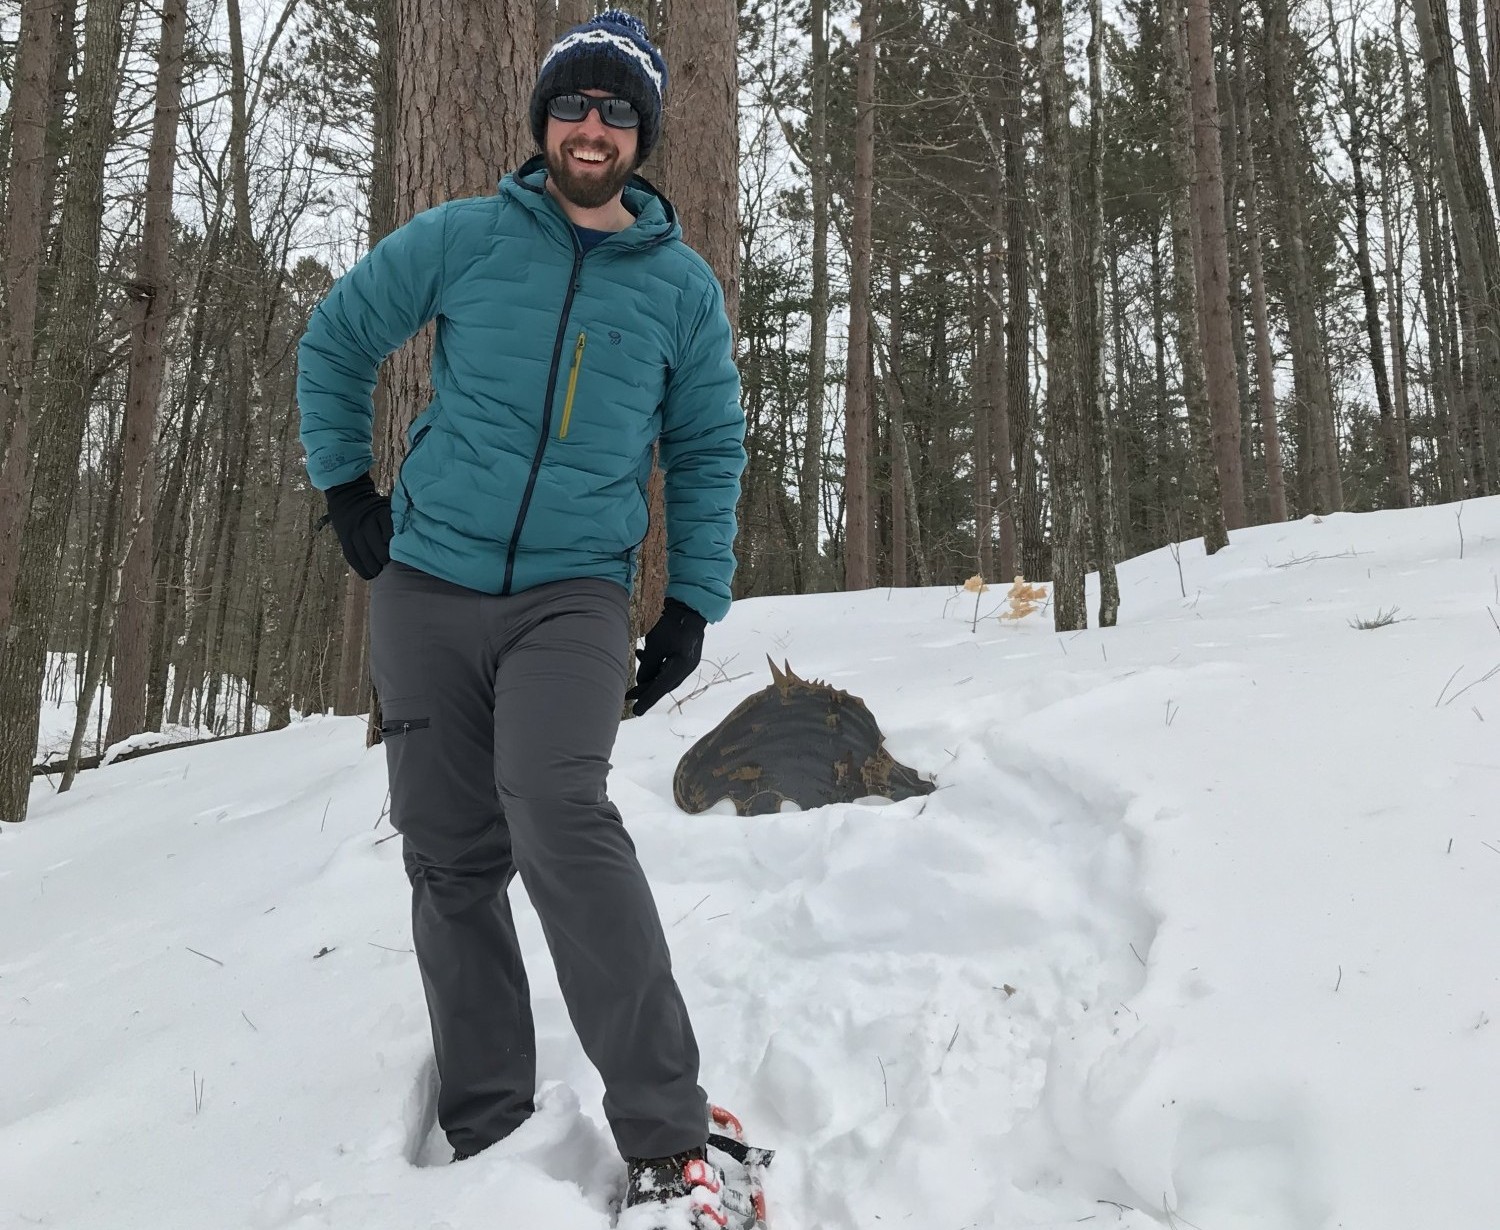 hands, feet, head warm while snowshoeing: man posing on WI trail